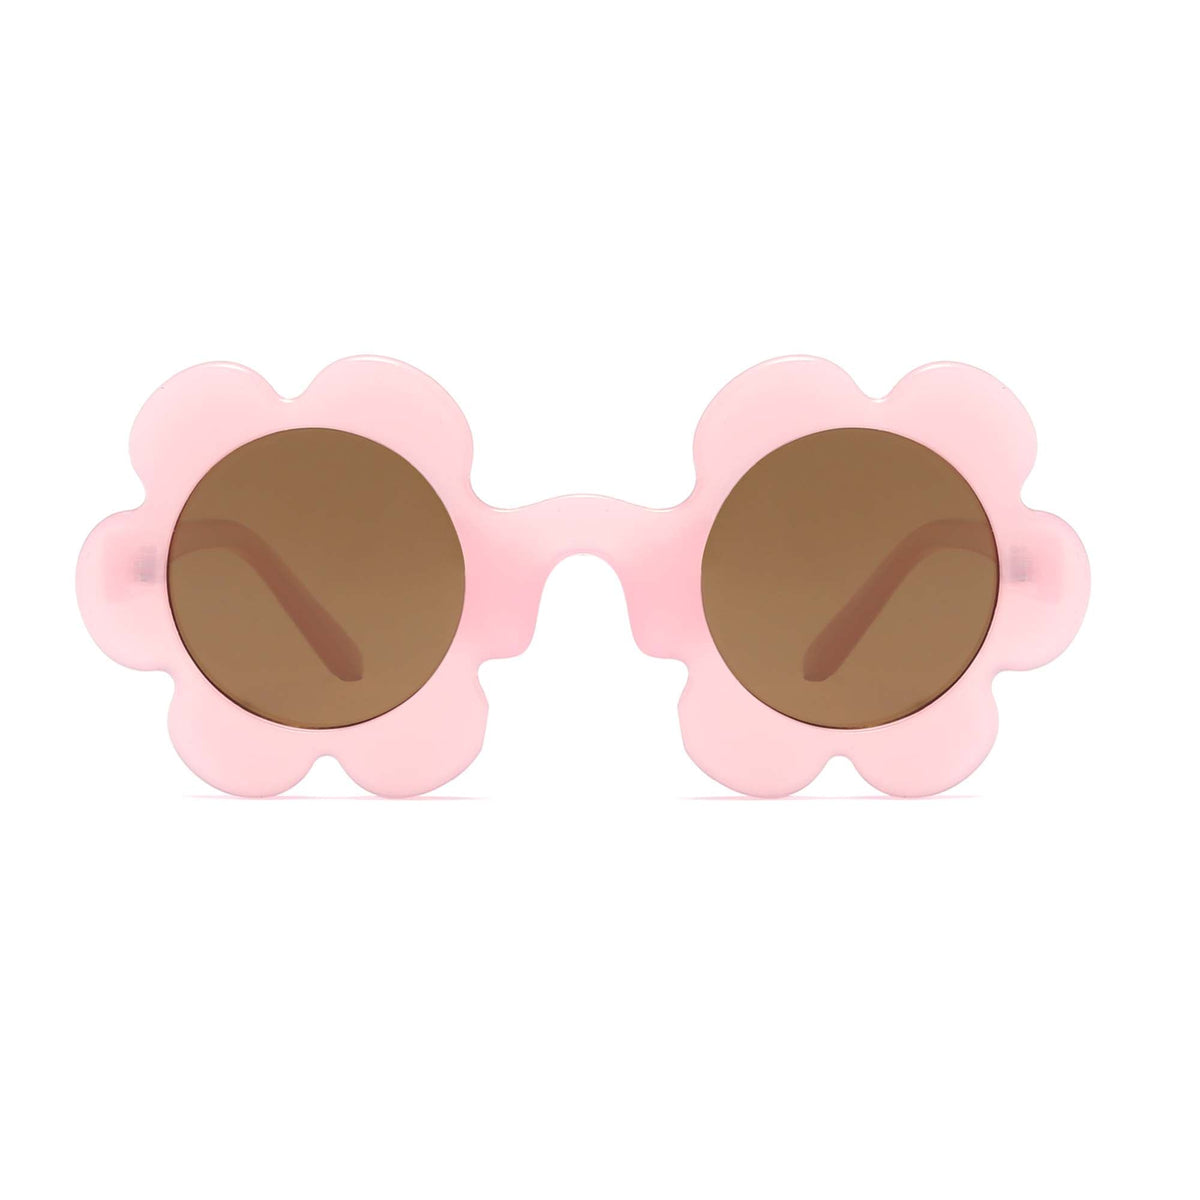 Taizhou Two Circles Trading Co. Ltd. Costume Accessories Pink Sunflower Shape Glasses for Adults 810077658741